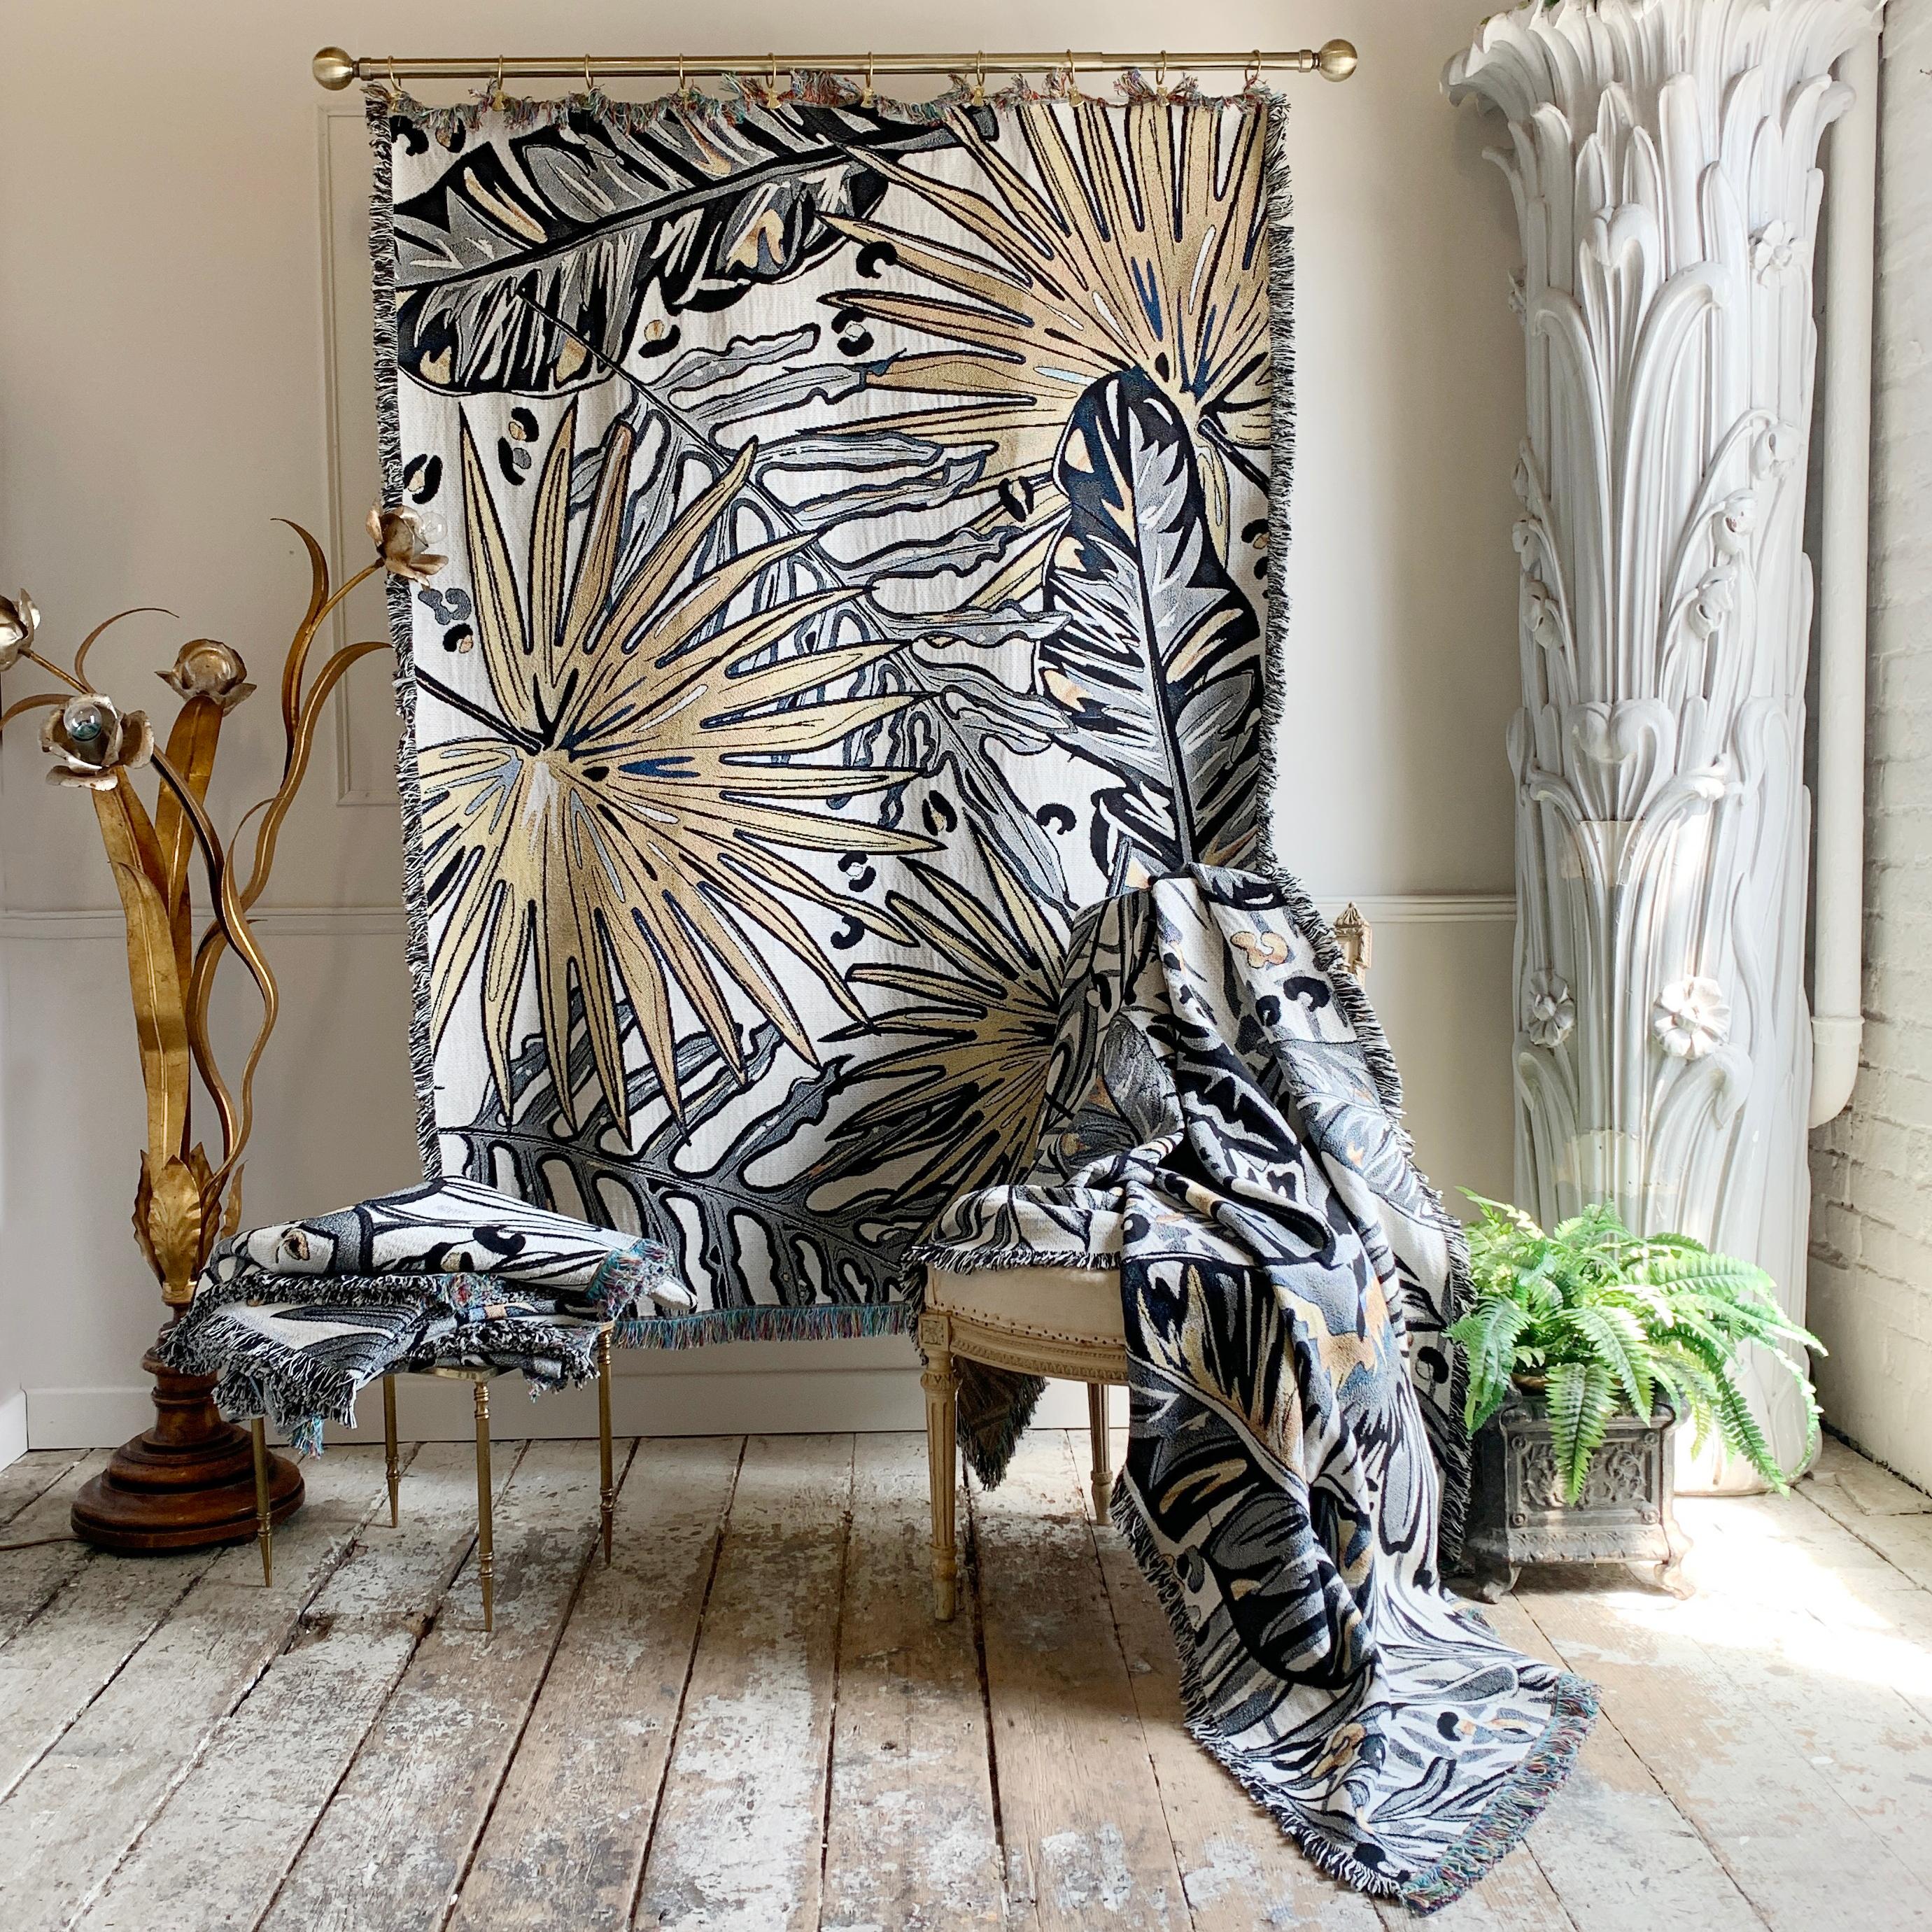 The Tropics Collection 'Palm Leaf' woven recycled cotton throw

As a throw, blanket, draped or a wall hung, this luxuriously versatile woven throw will create a bold statement in any interior.

Beautiful and dramatic monochrome throw, adorned